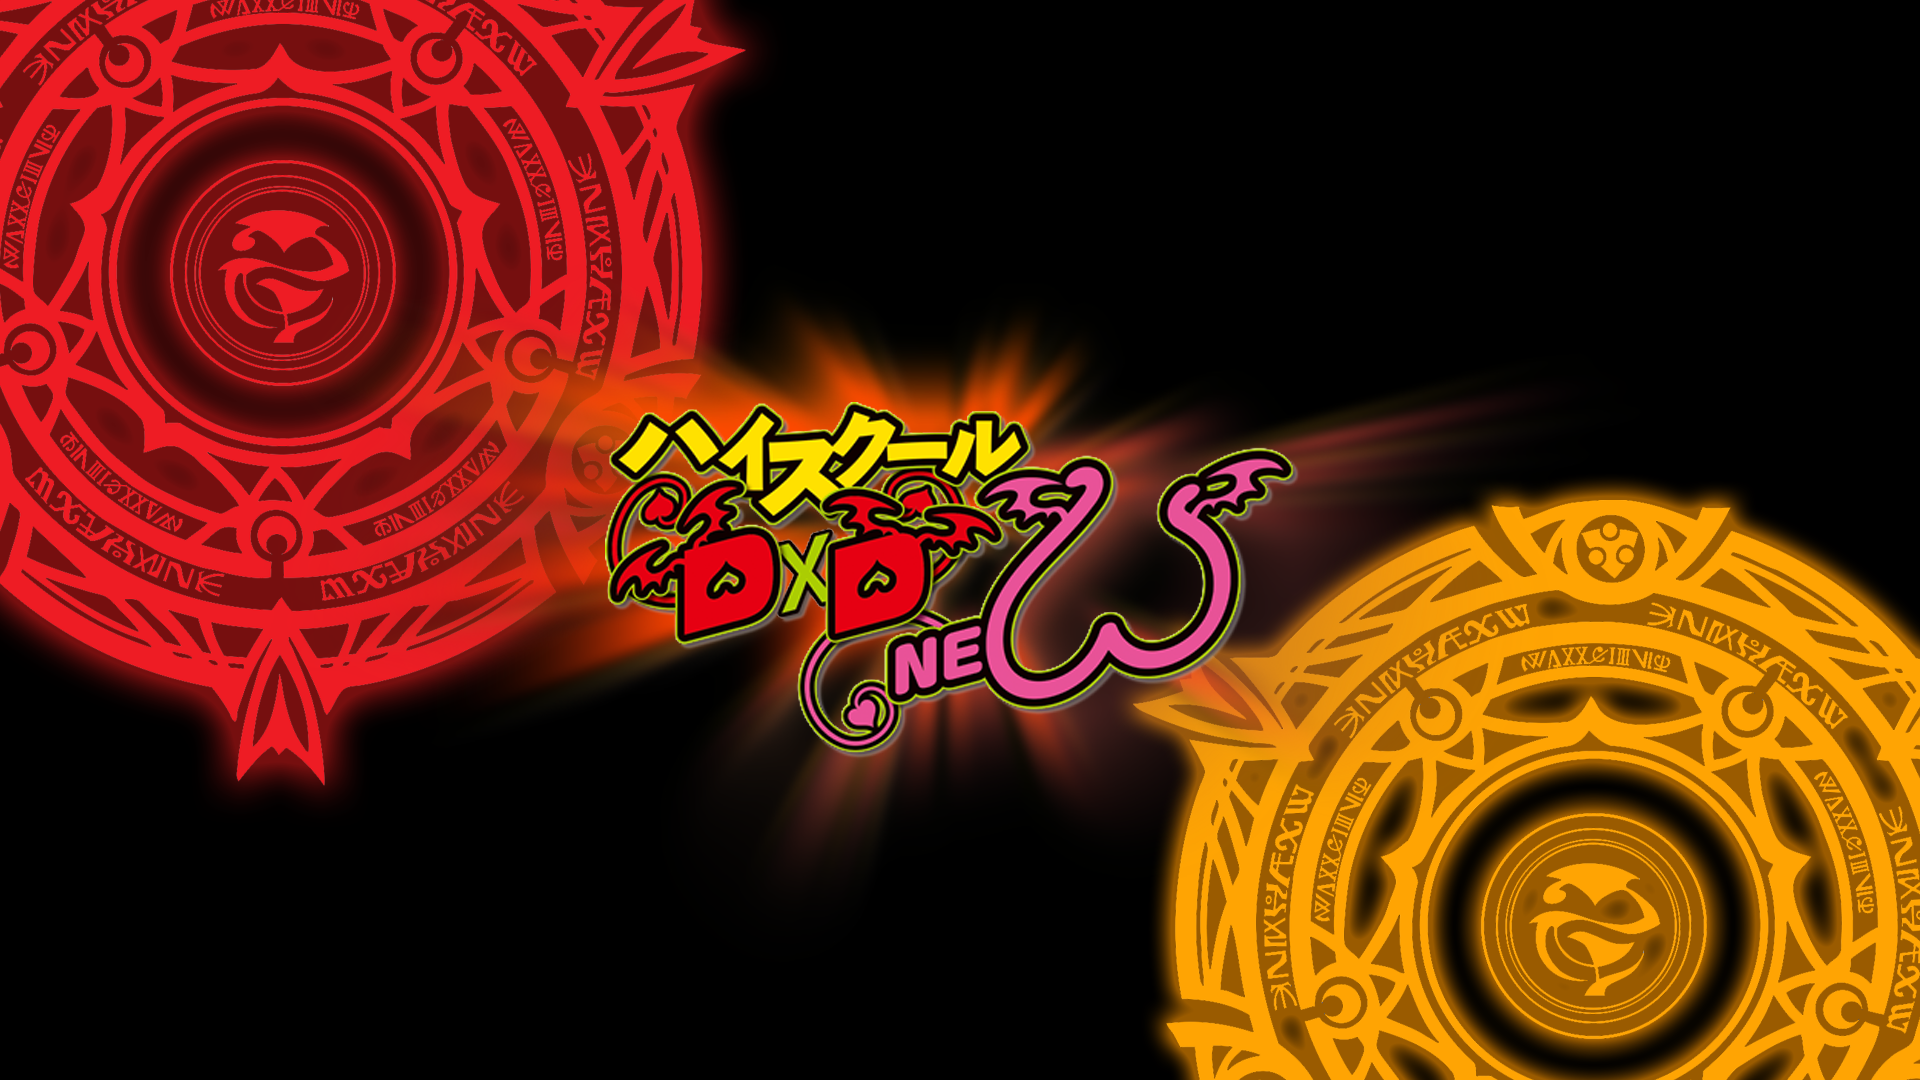 http://images1.wikia.nocookie.net/__cb20130524234660/highschooldxd/images/5/52/Highschool_dxd_new_wallpaper2.png